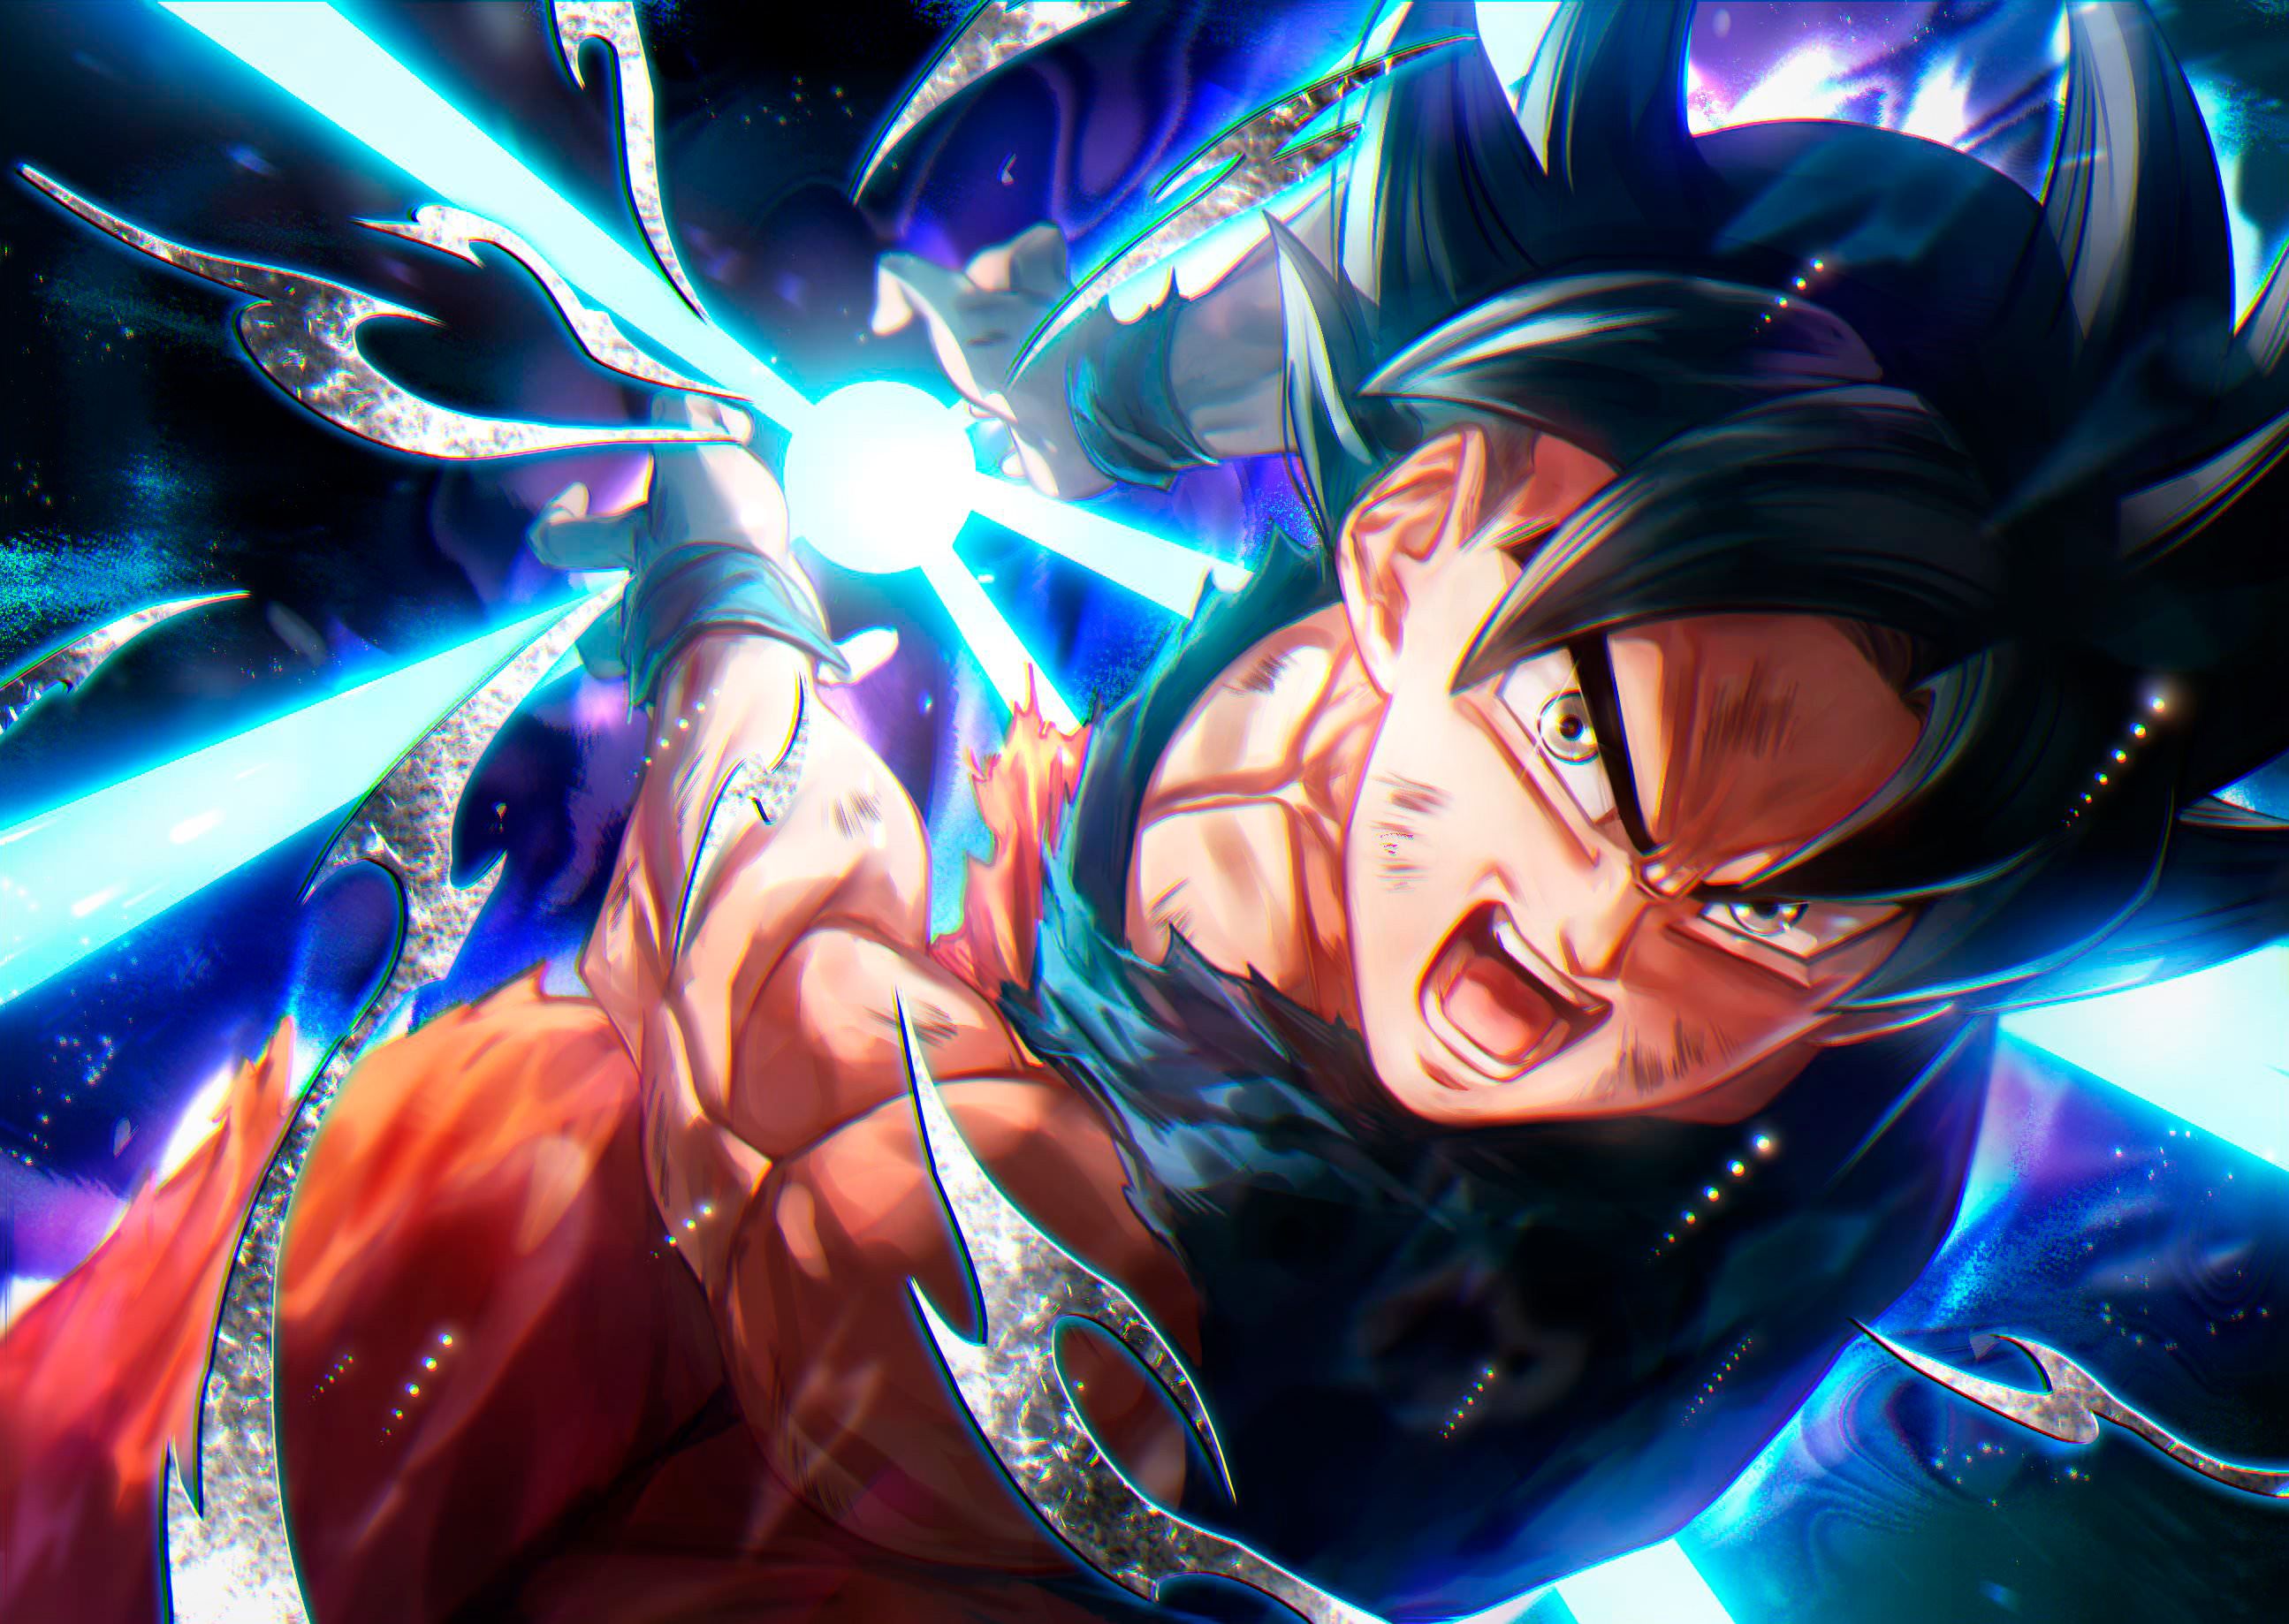 Goku In Dragon Ball Super Anime 4k, HD Anime, 4k Wallpapers, Image, Backgrounds, Photos and Pictures